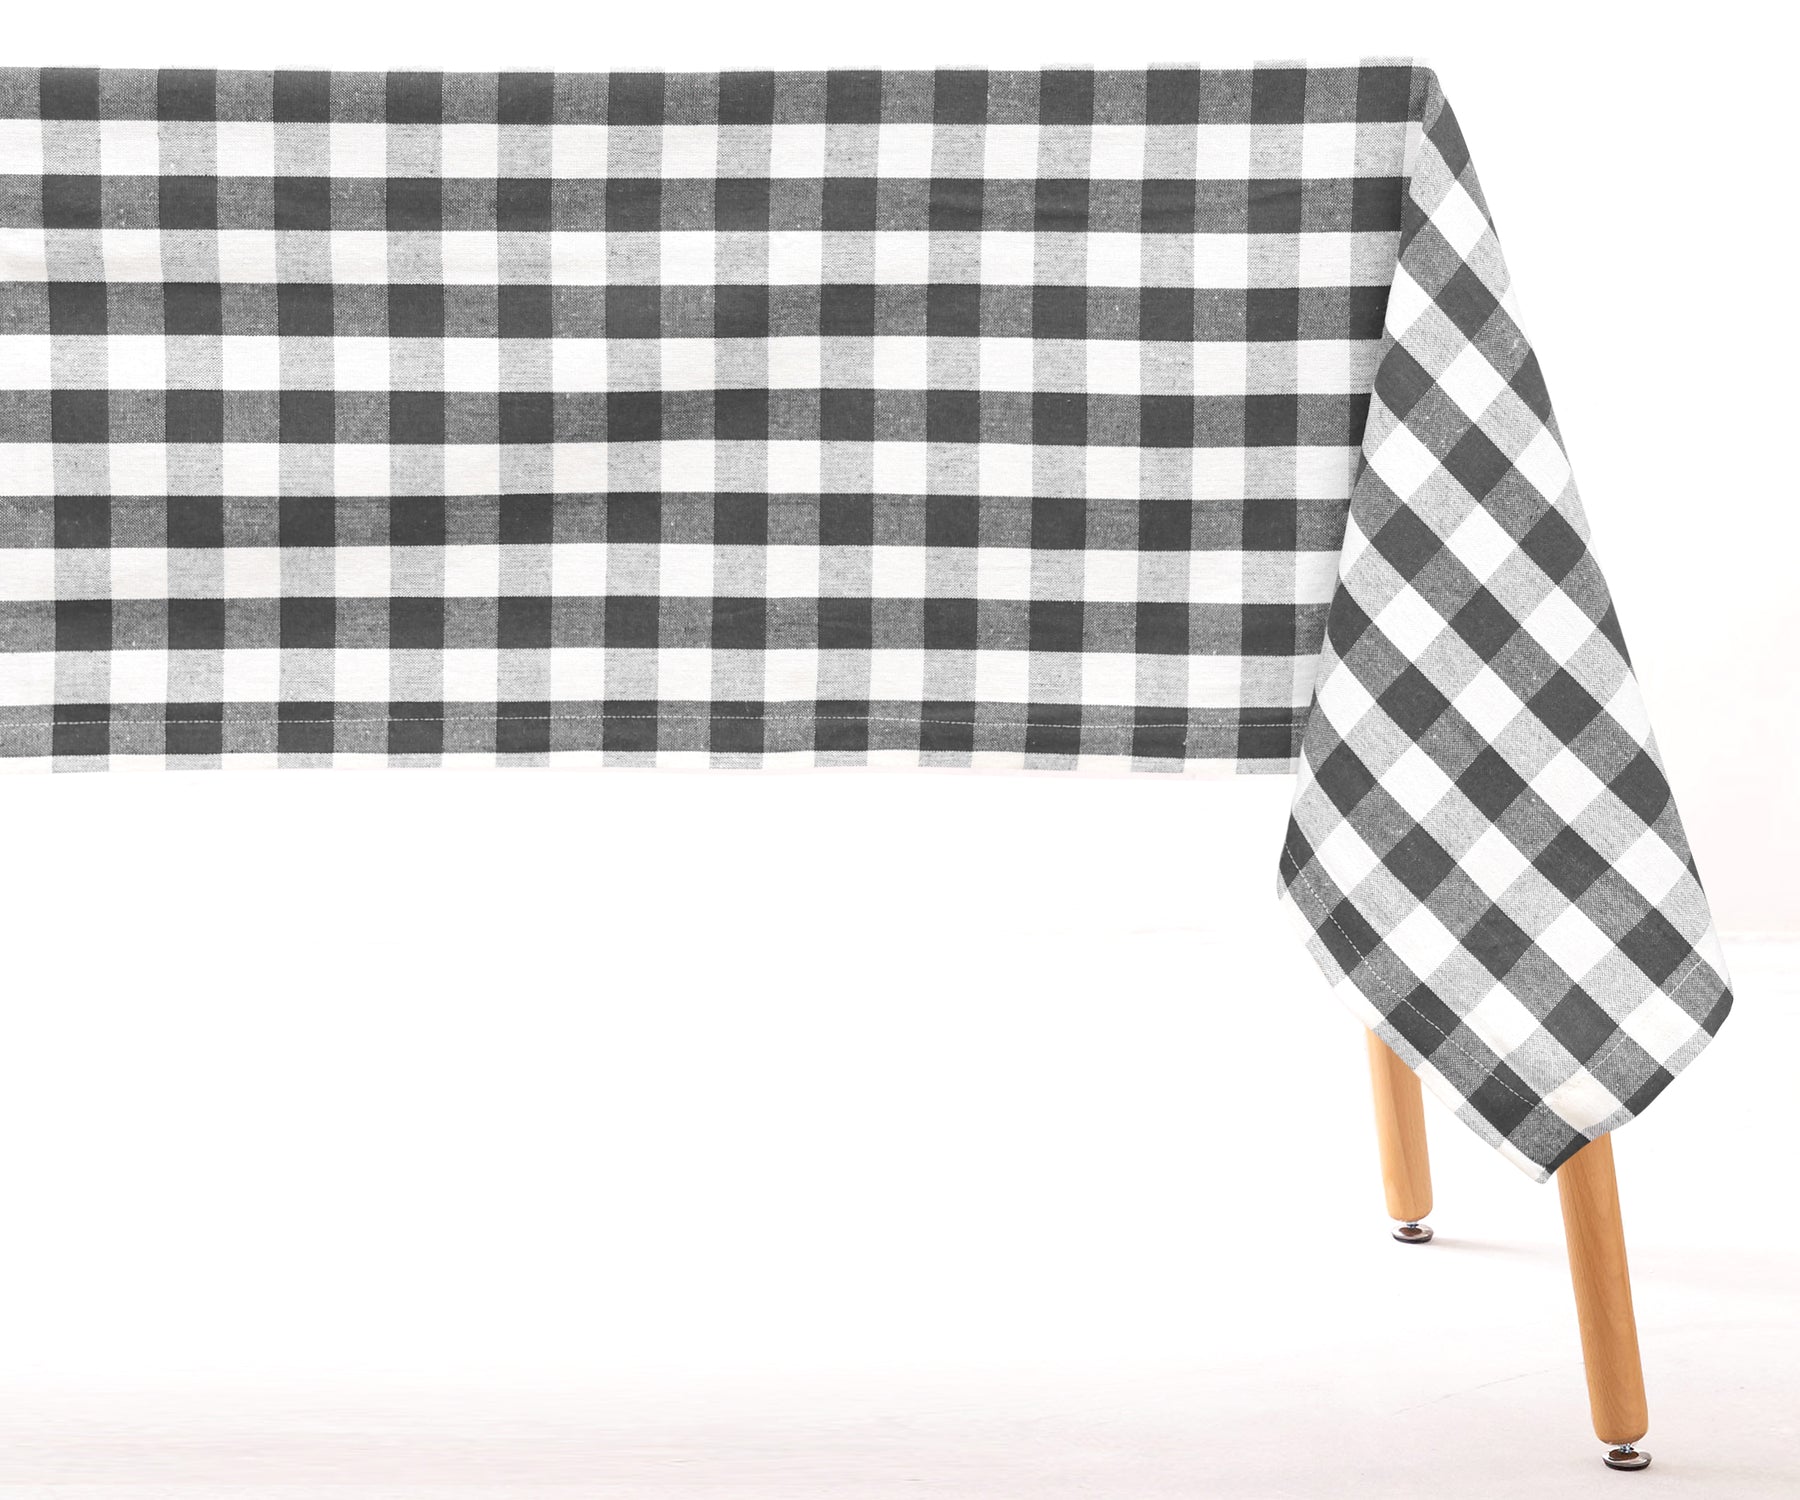 Cotton tablecloth ideal for everyday meals, soft and comfortable.